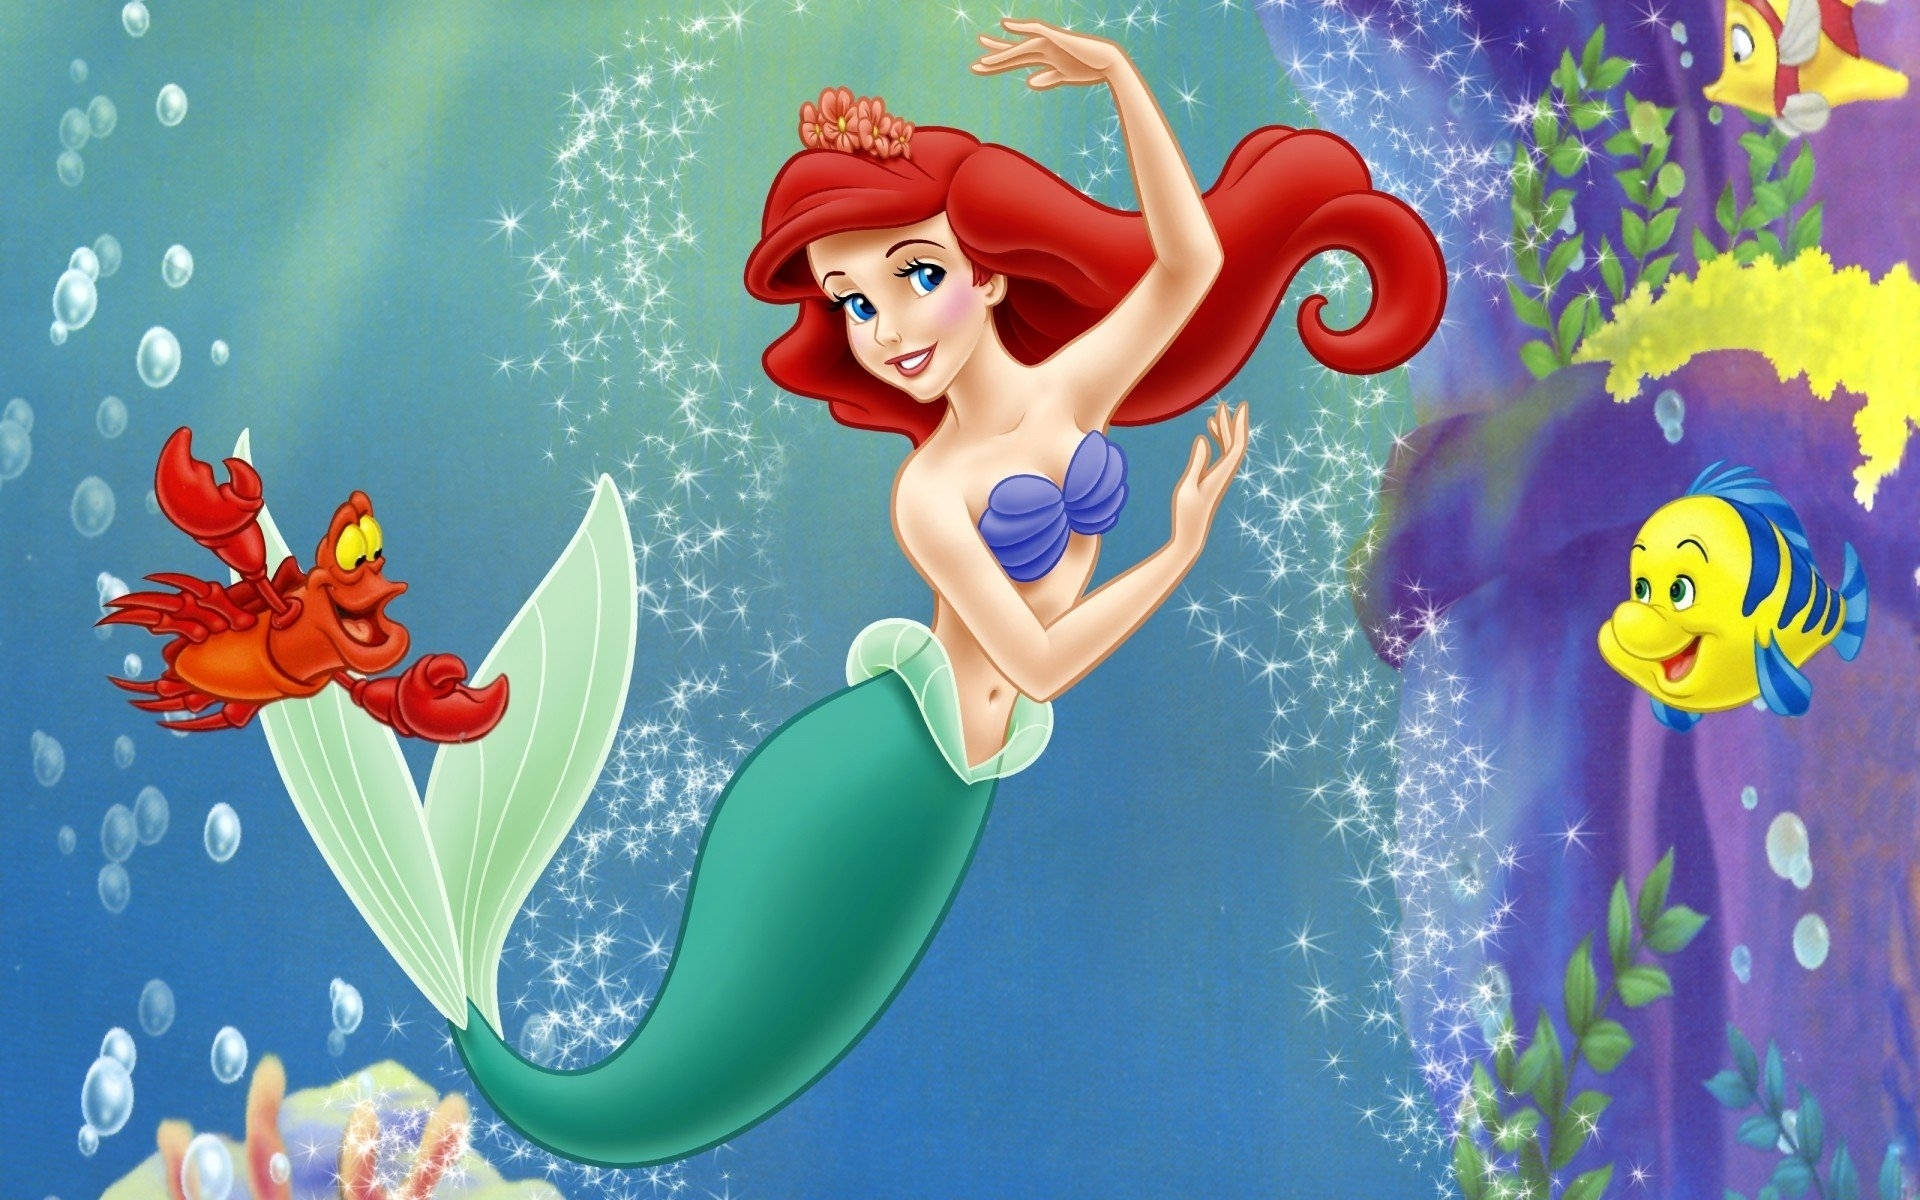 Disney Princess Ariel With Fishes Wallpaper